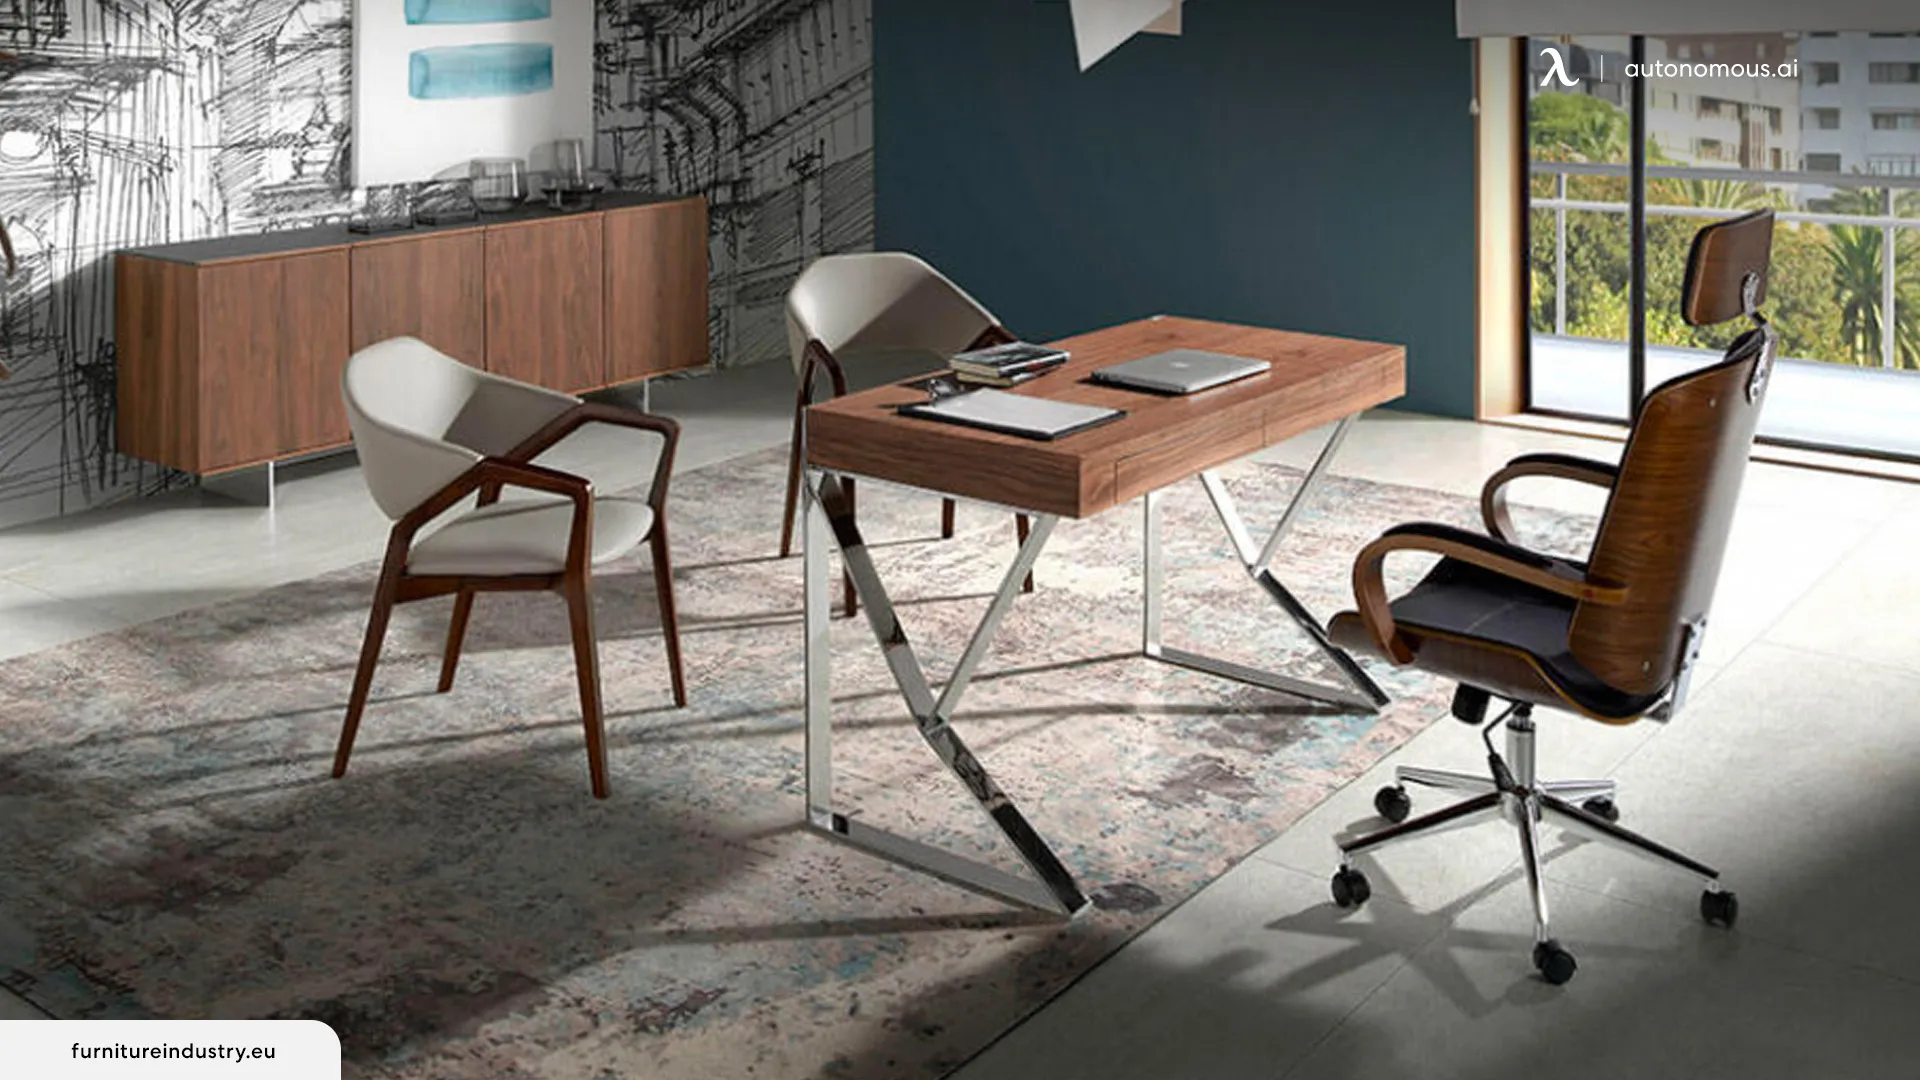 Desks with wood office chair